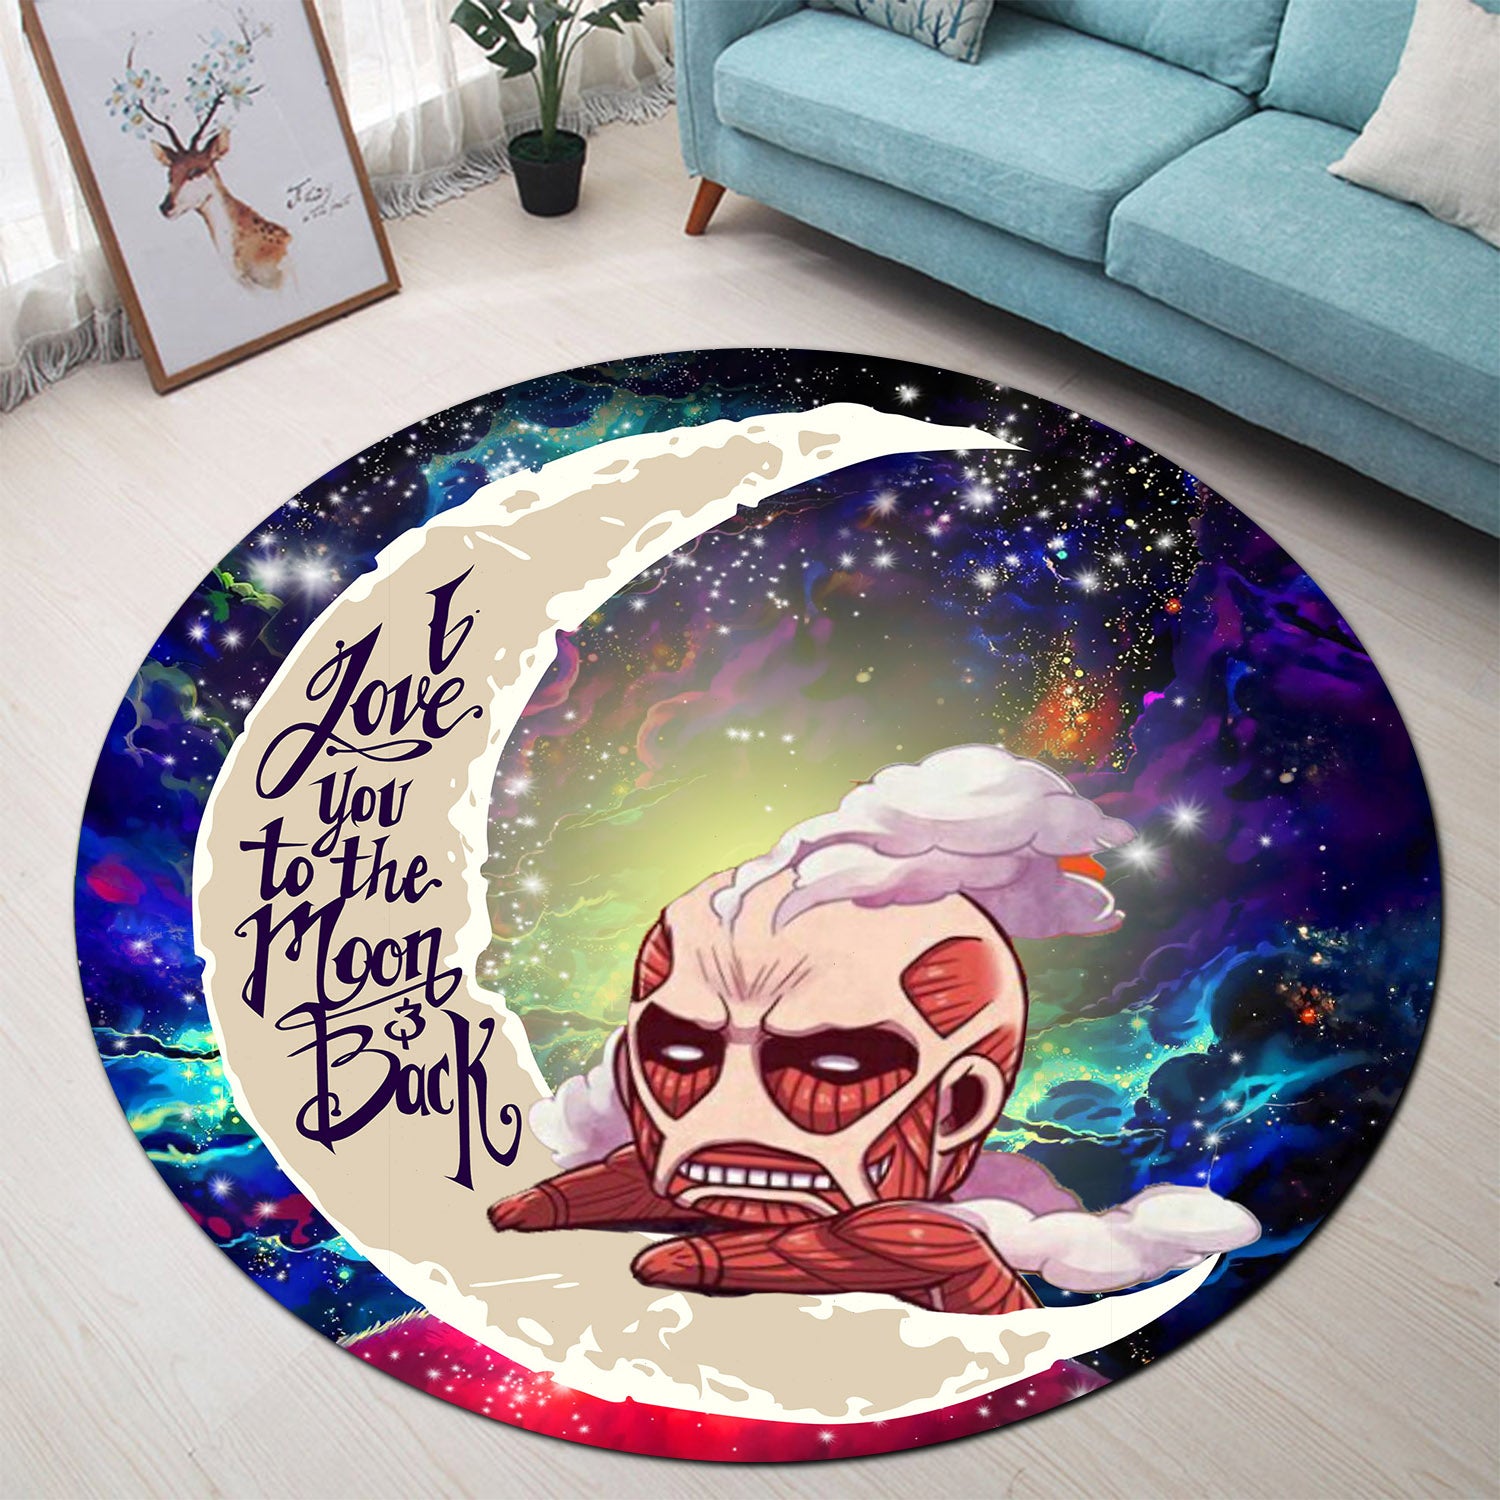 Attack On Titan Love You To The Moon Galaxy Round Carpet Rug Bedroom Livingroom Home Decor Nearkii